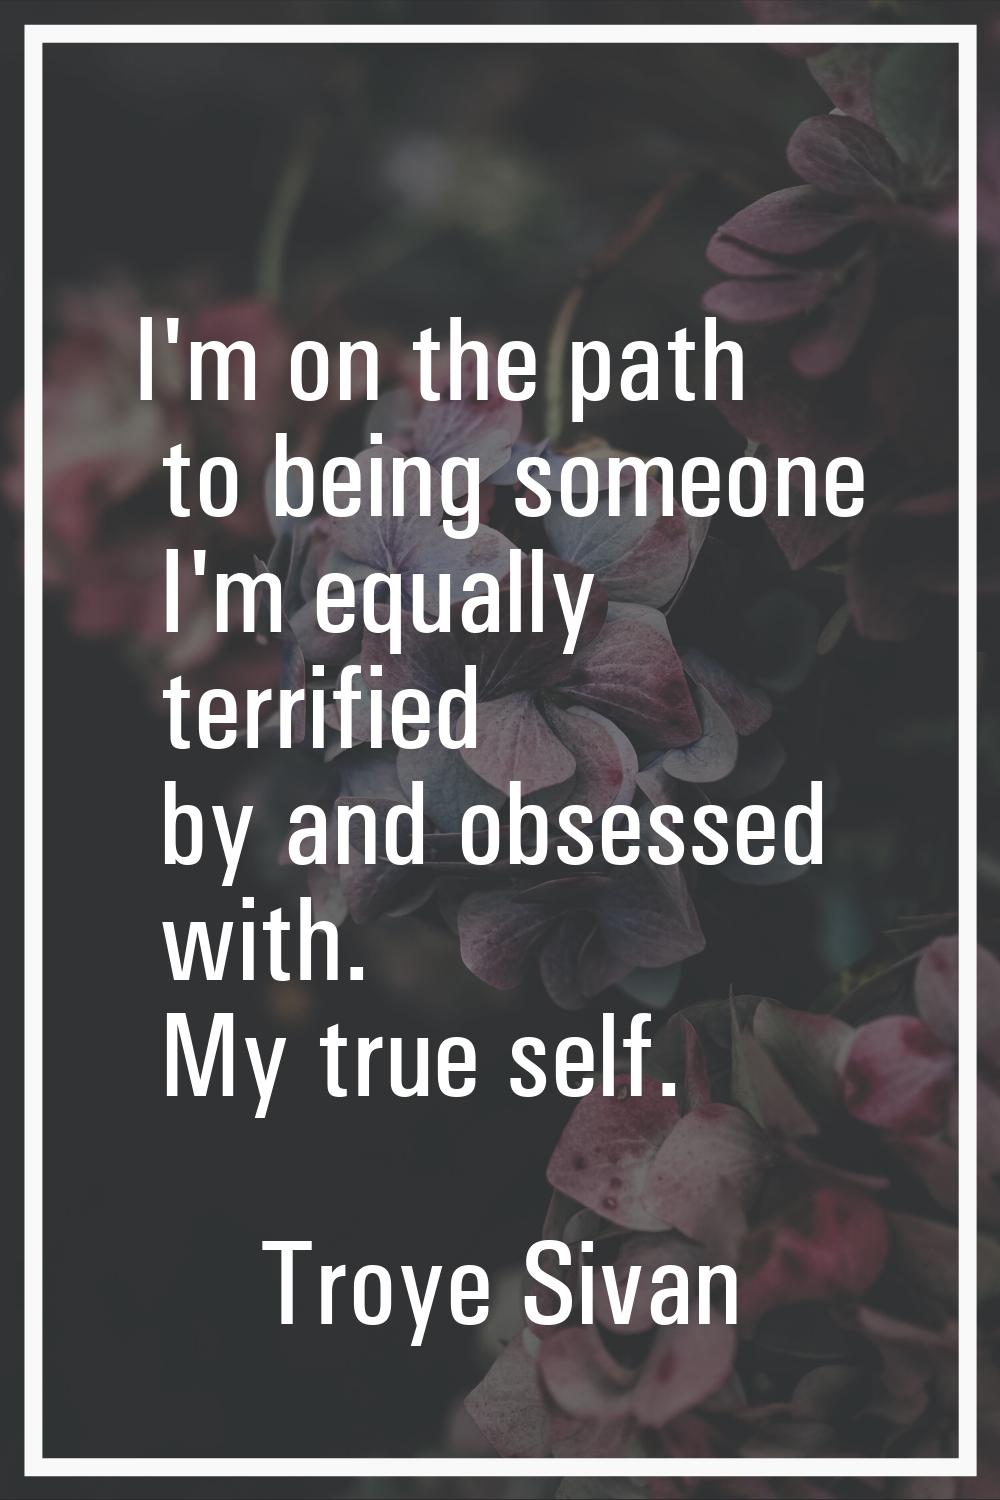 I'm on the path to being someone I'm equally terrified by and obsessed with. My true self.